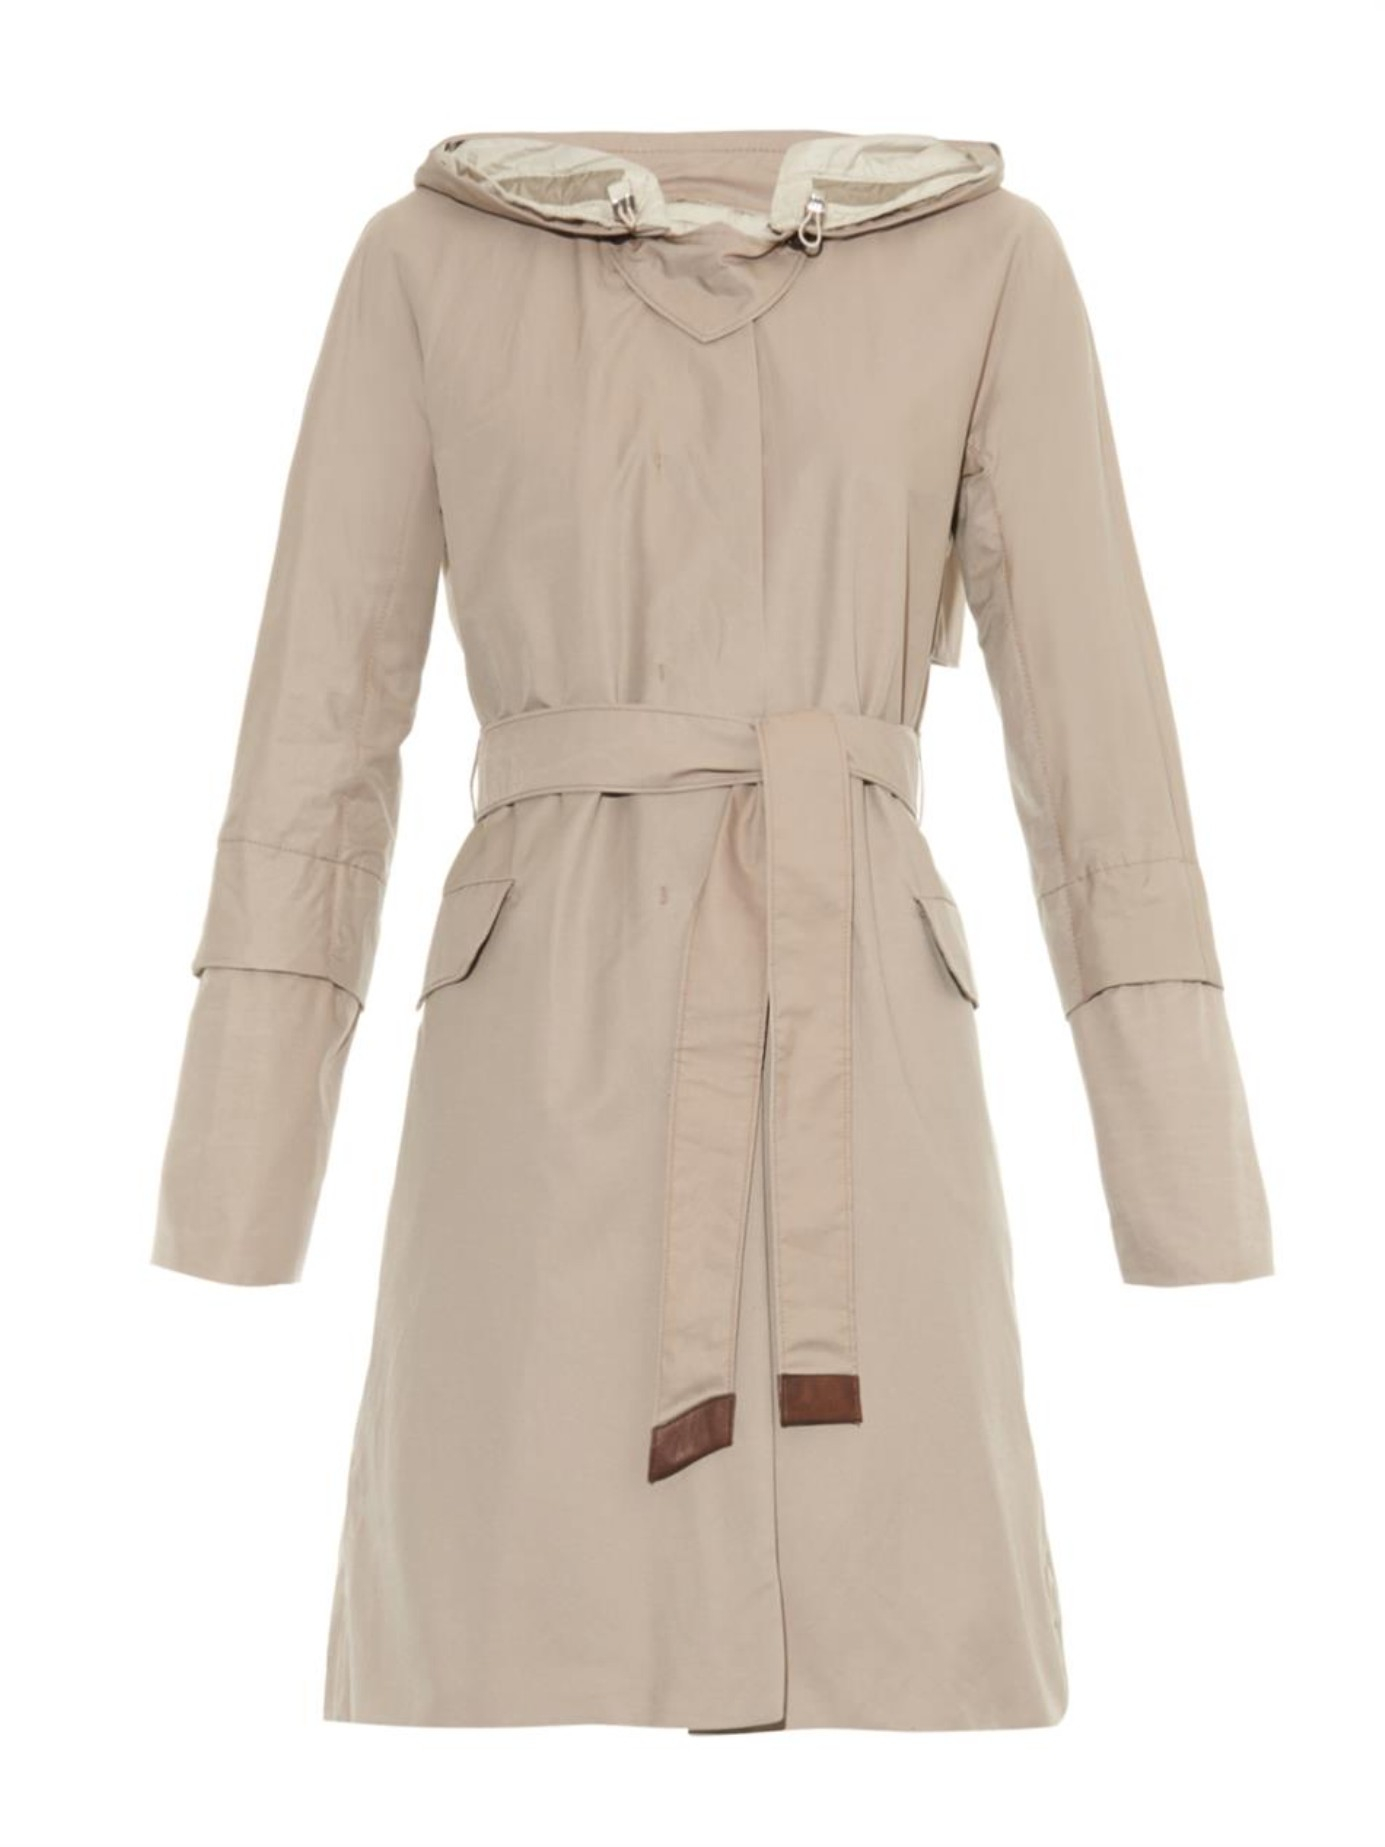 Max Mara Leather Desert Reversible Trench Coat in Beige (Natural) - Lyst